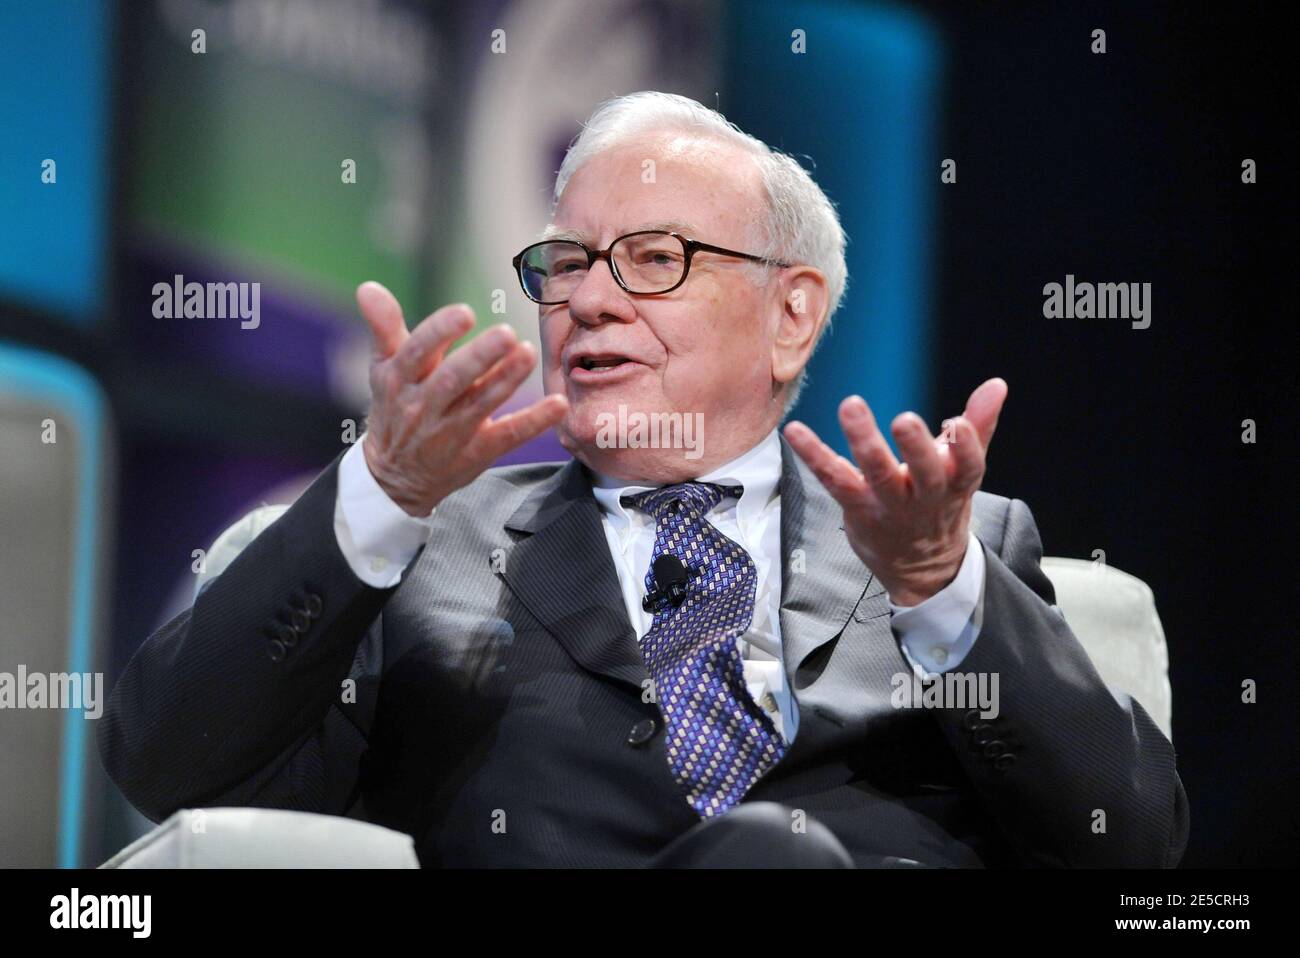 Warren Buffett, Chairman and CEO of Berkshire Hathaway Inc, attends The Women's Conference 2008 held at the Long Beach Convention Center in Los Angeles, CA, USA on October 22, 2008. Photo by Lionel Hahn/ABACAPRESS.COM Stock Photo